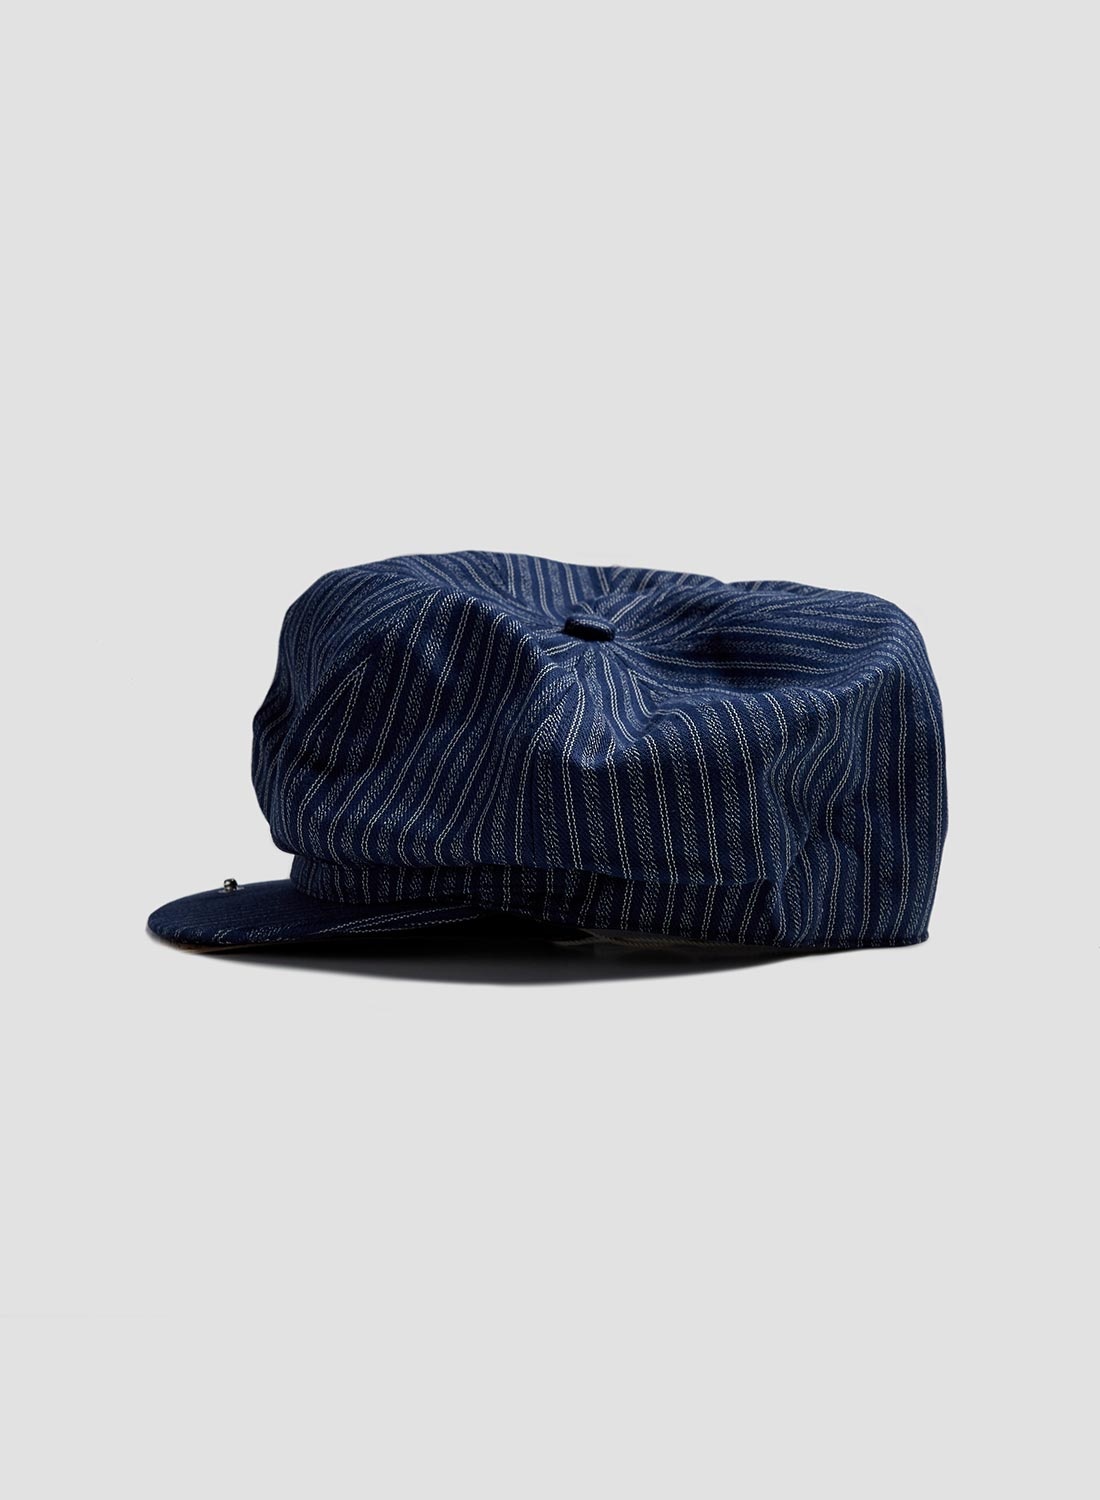 Adjustable Costume 20's Style Casquette Navy - 3